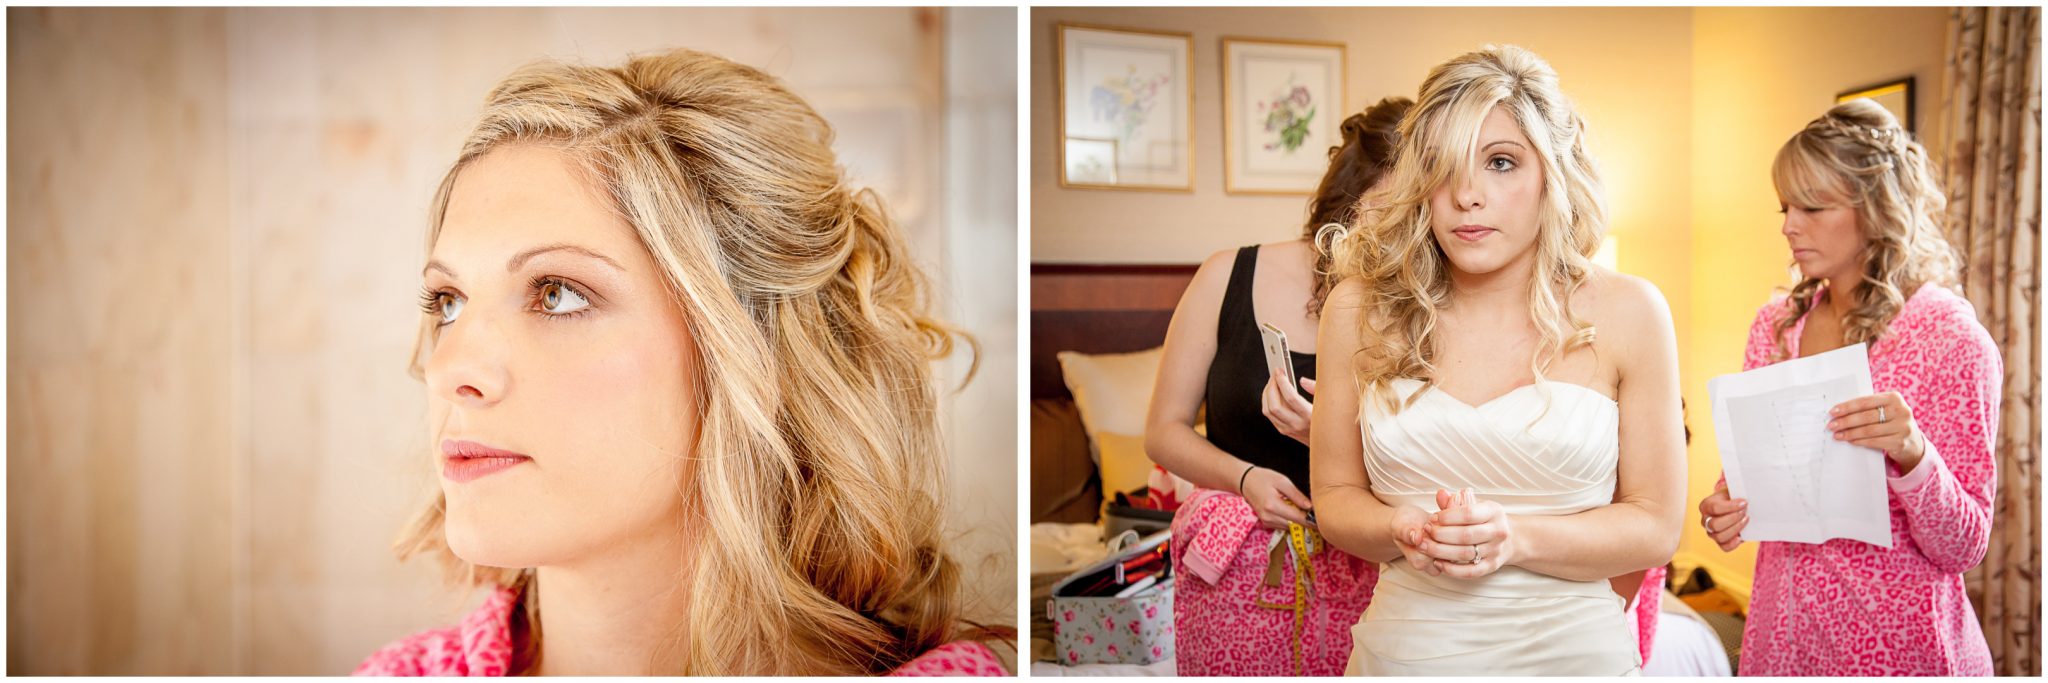 Audleys Wood wedding photography bride getting ready